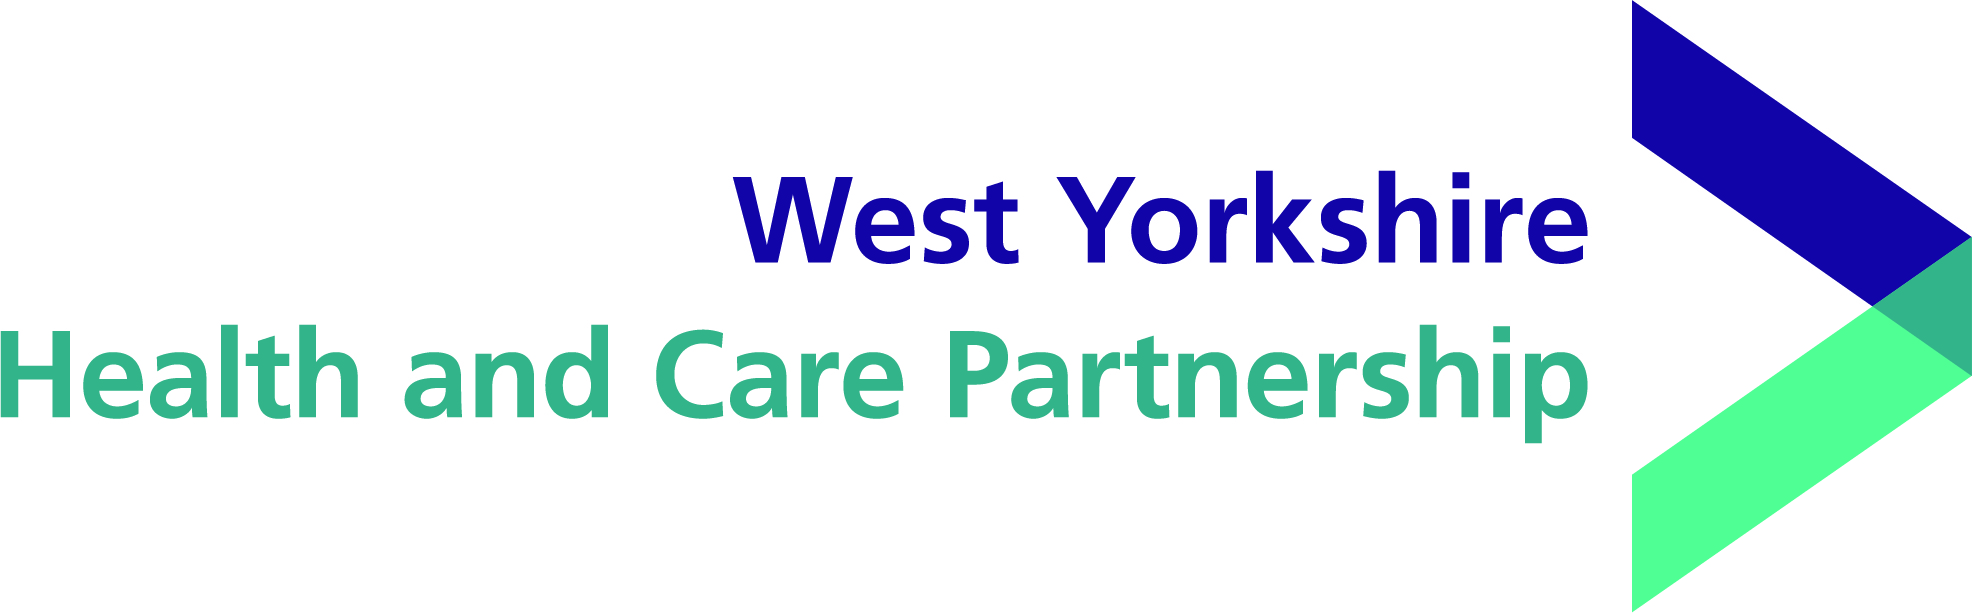 West Yorkshire and Harrogate Health and Care Partnership